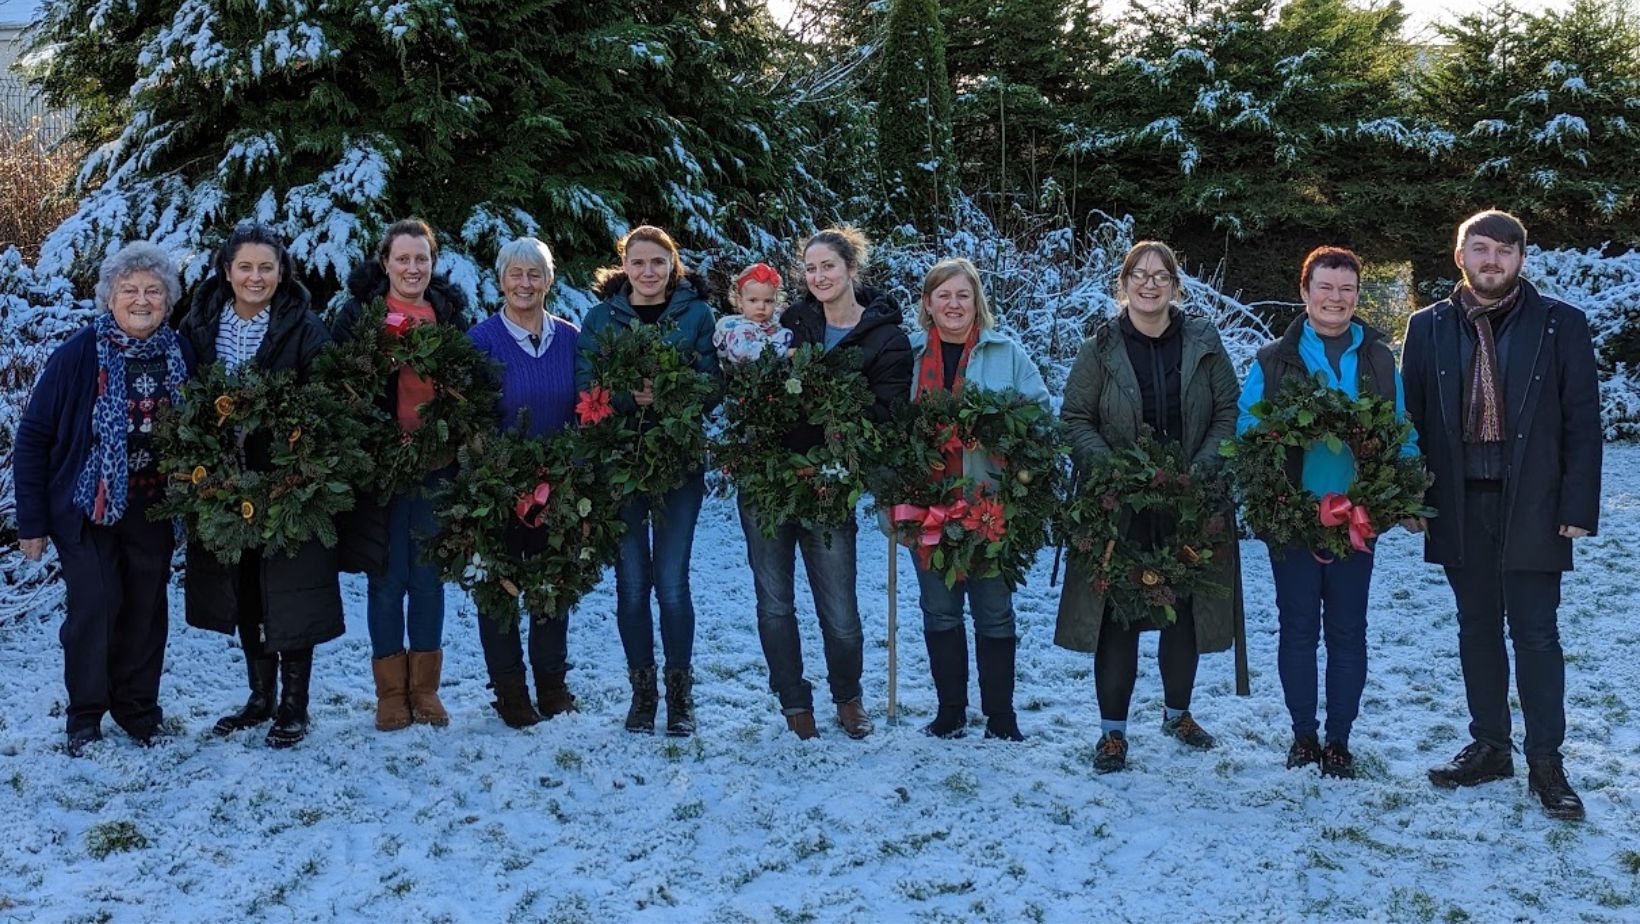 Free Christmas Community Arts Wreath-making Workshops across your council area!